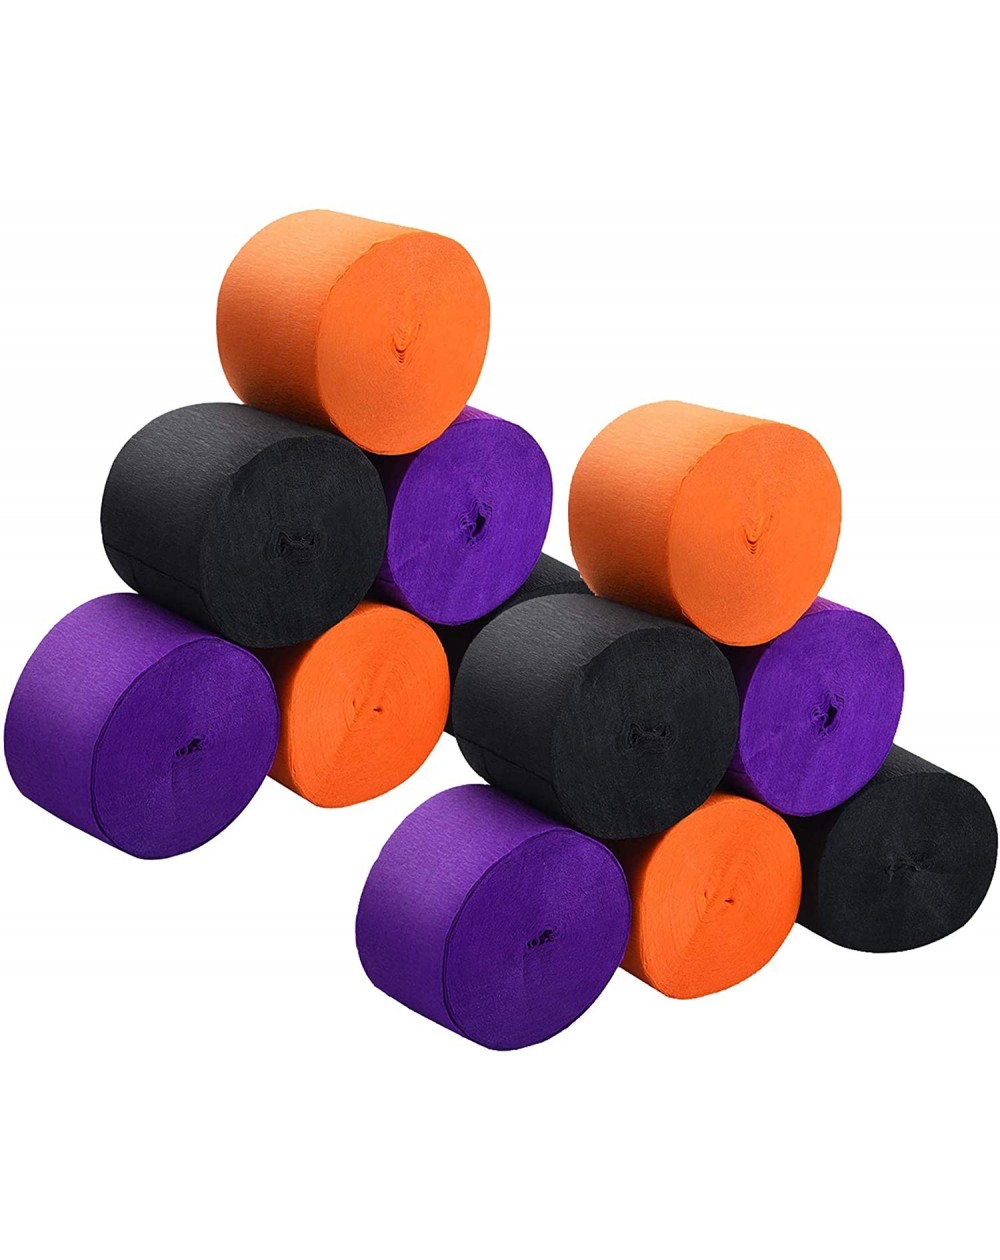 Party Favors 360 Feet Halloween Crepe Party Streamers 12 Rolls 3 Colors Purple Black Orange for Hallowmas Party Crafts Decora...